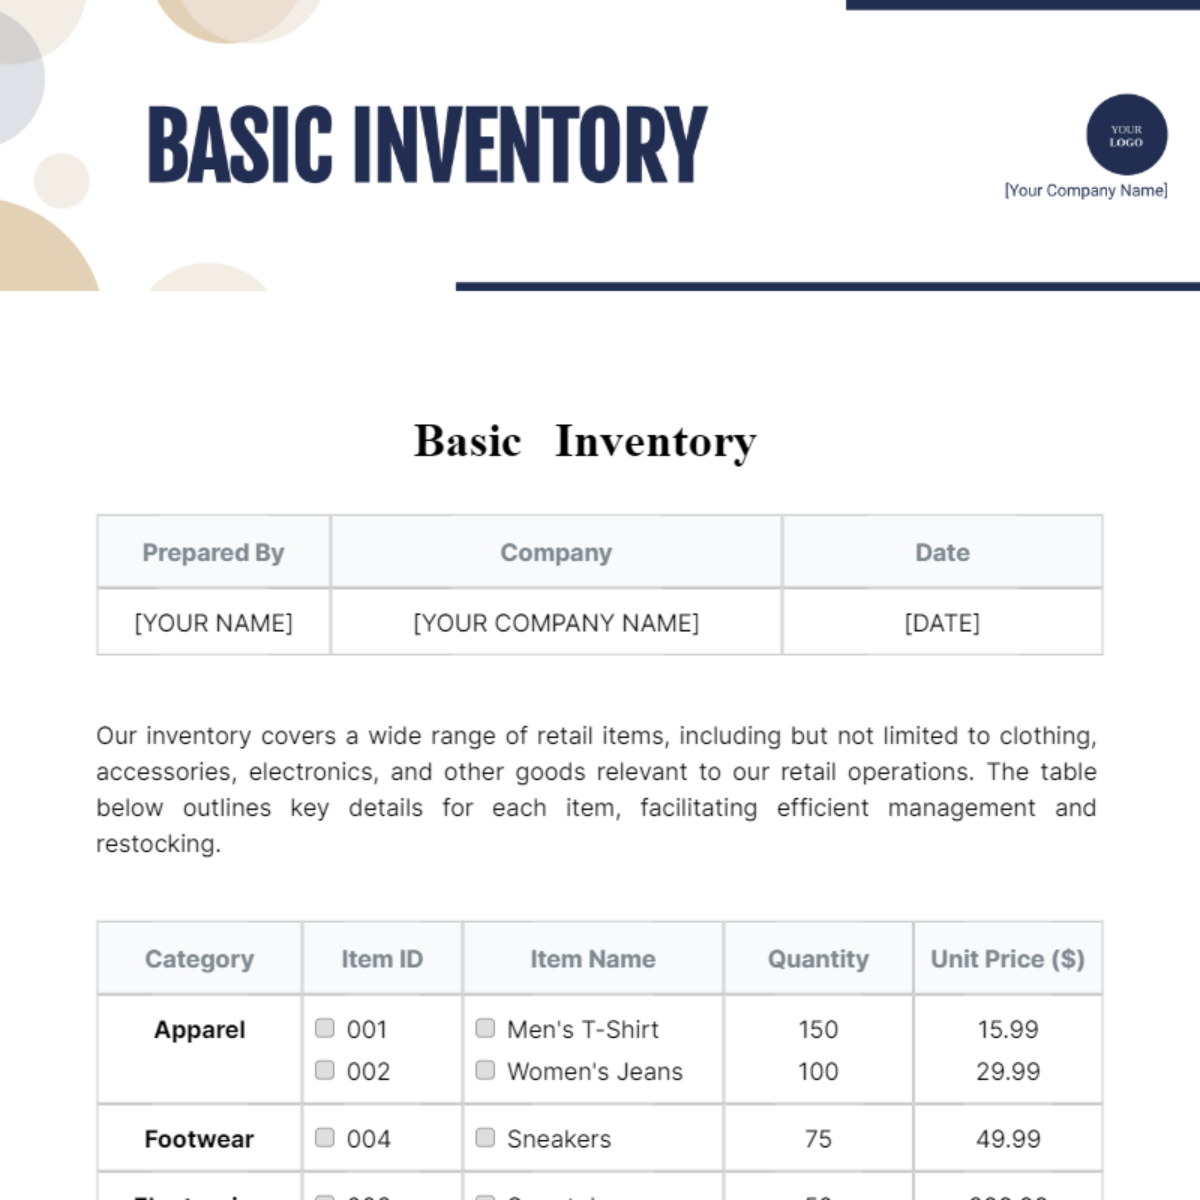 Basic Inventory Template